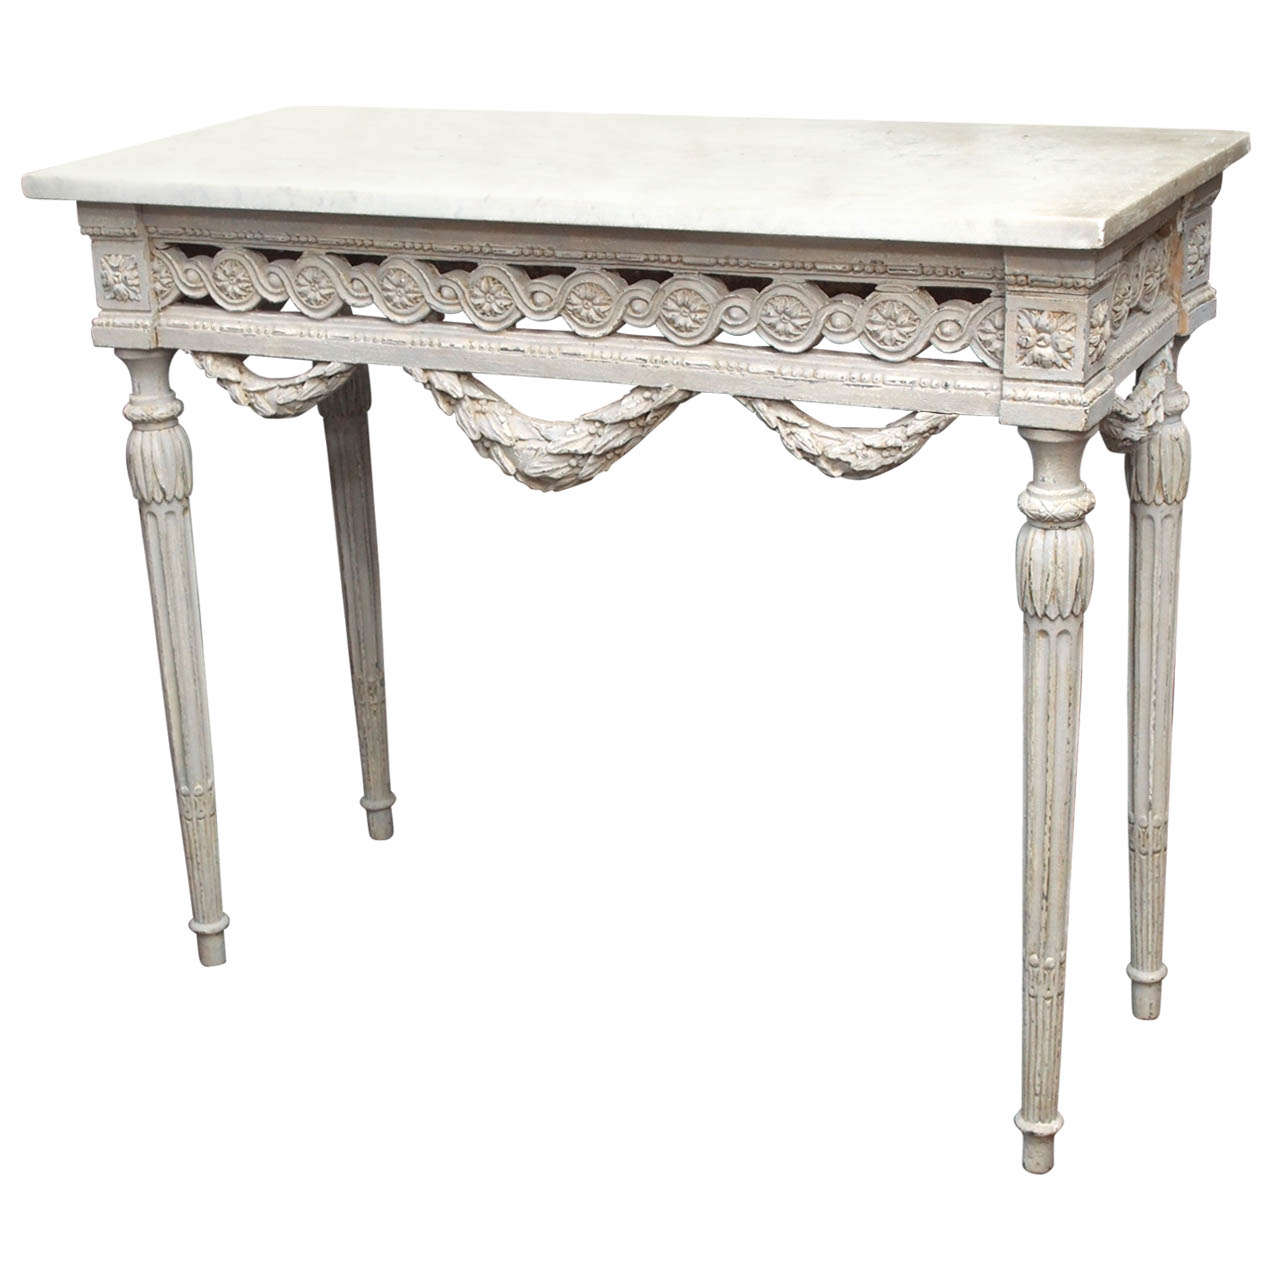 19th Century Louis XVI Painted Console